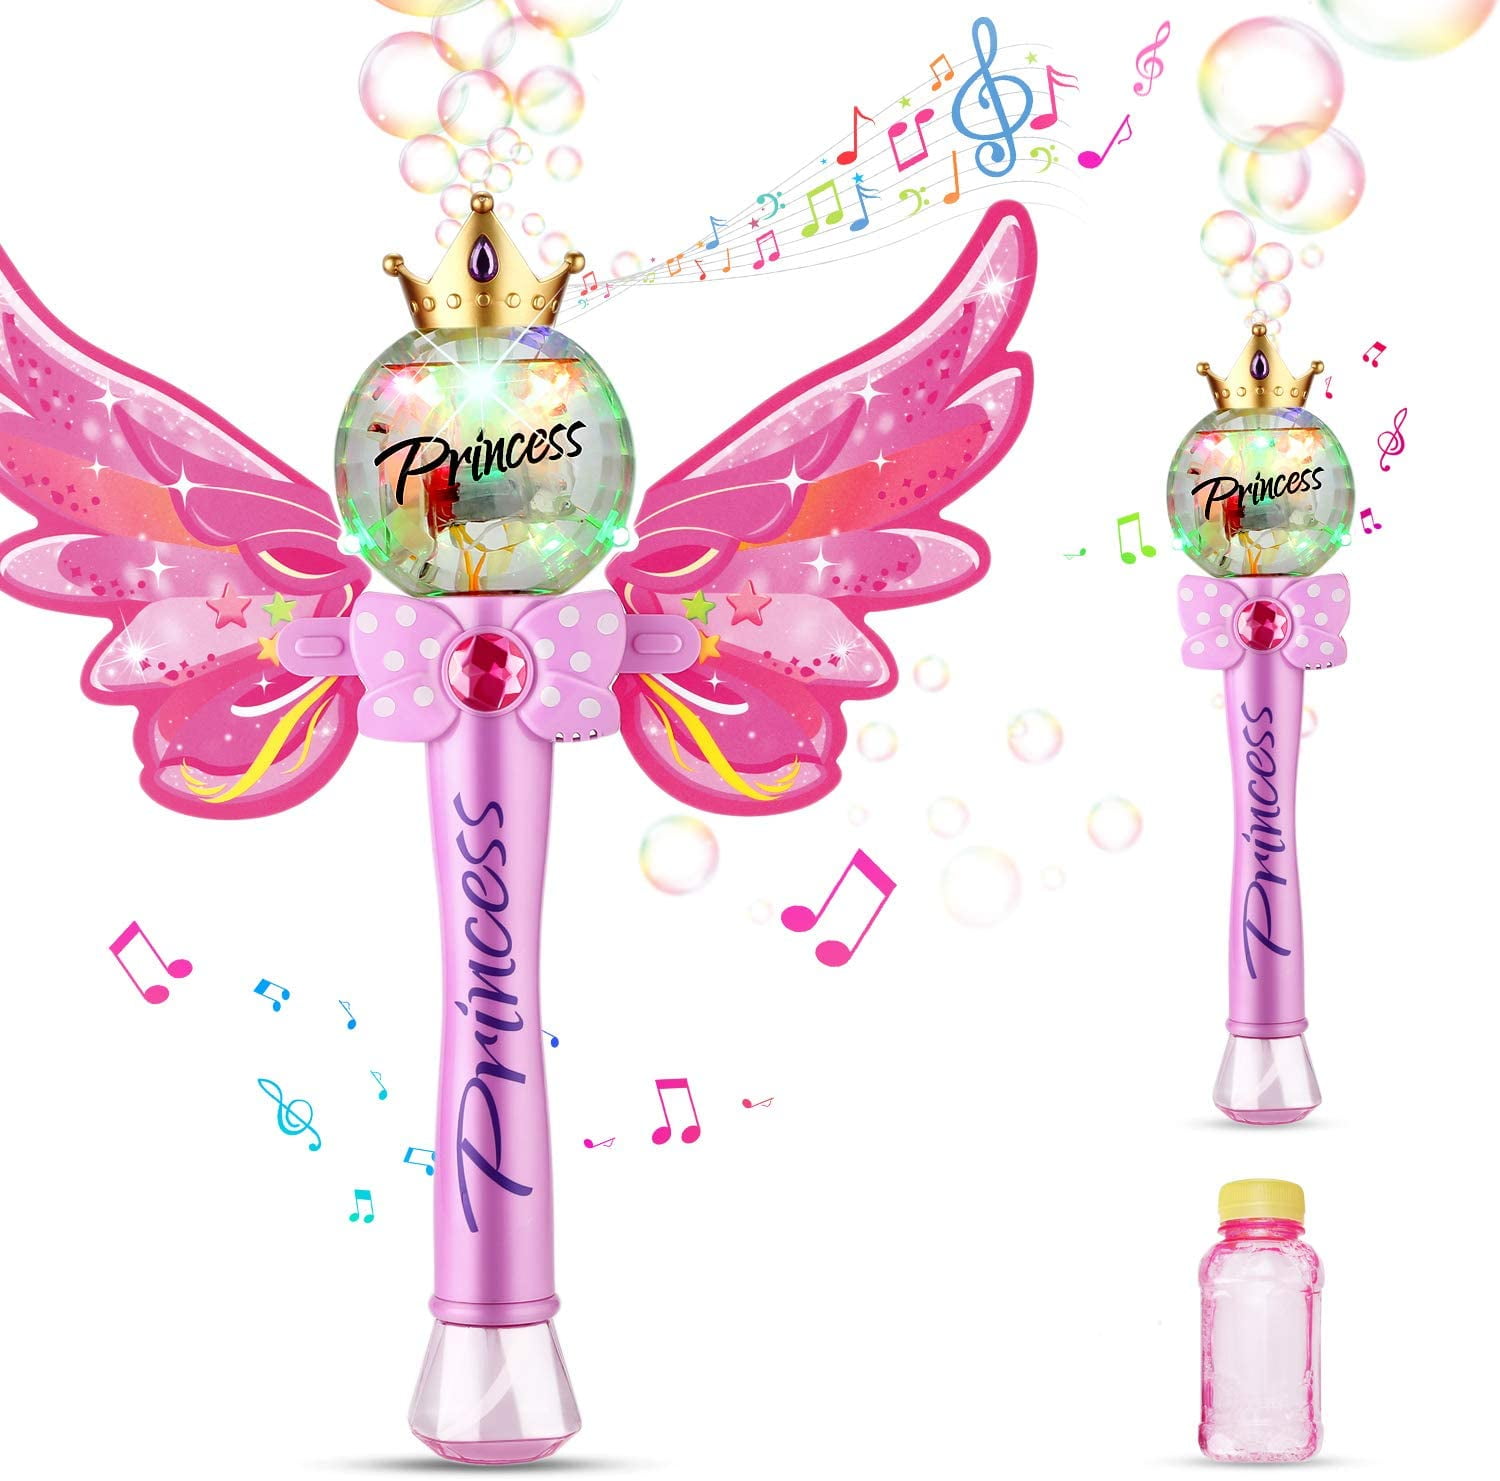 Party Wedding Outdoor Activity Bubble Machine with 2 Bottle Bubbles Refill Blue AINOLWAY Bubble Wand Blower Princess Magic Wand Butterfly Bubbles Toy for Girls